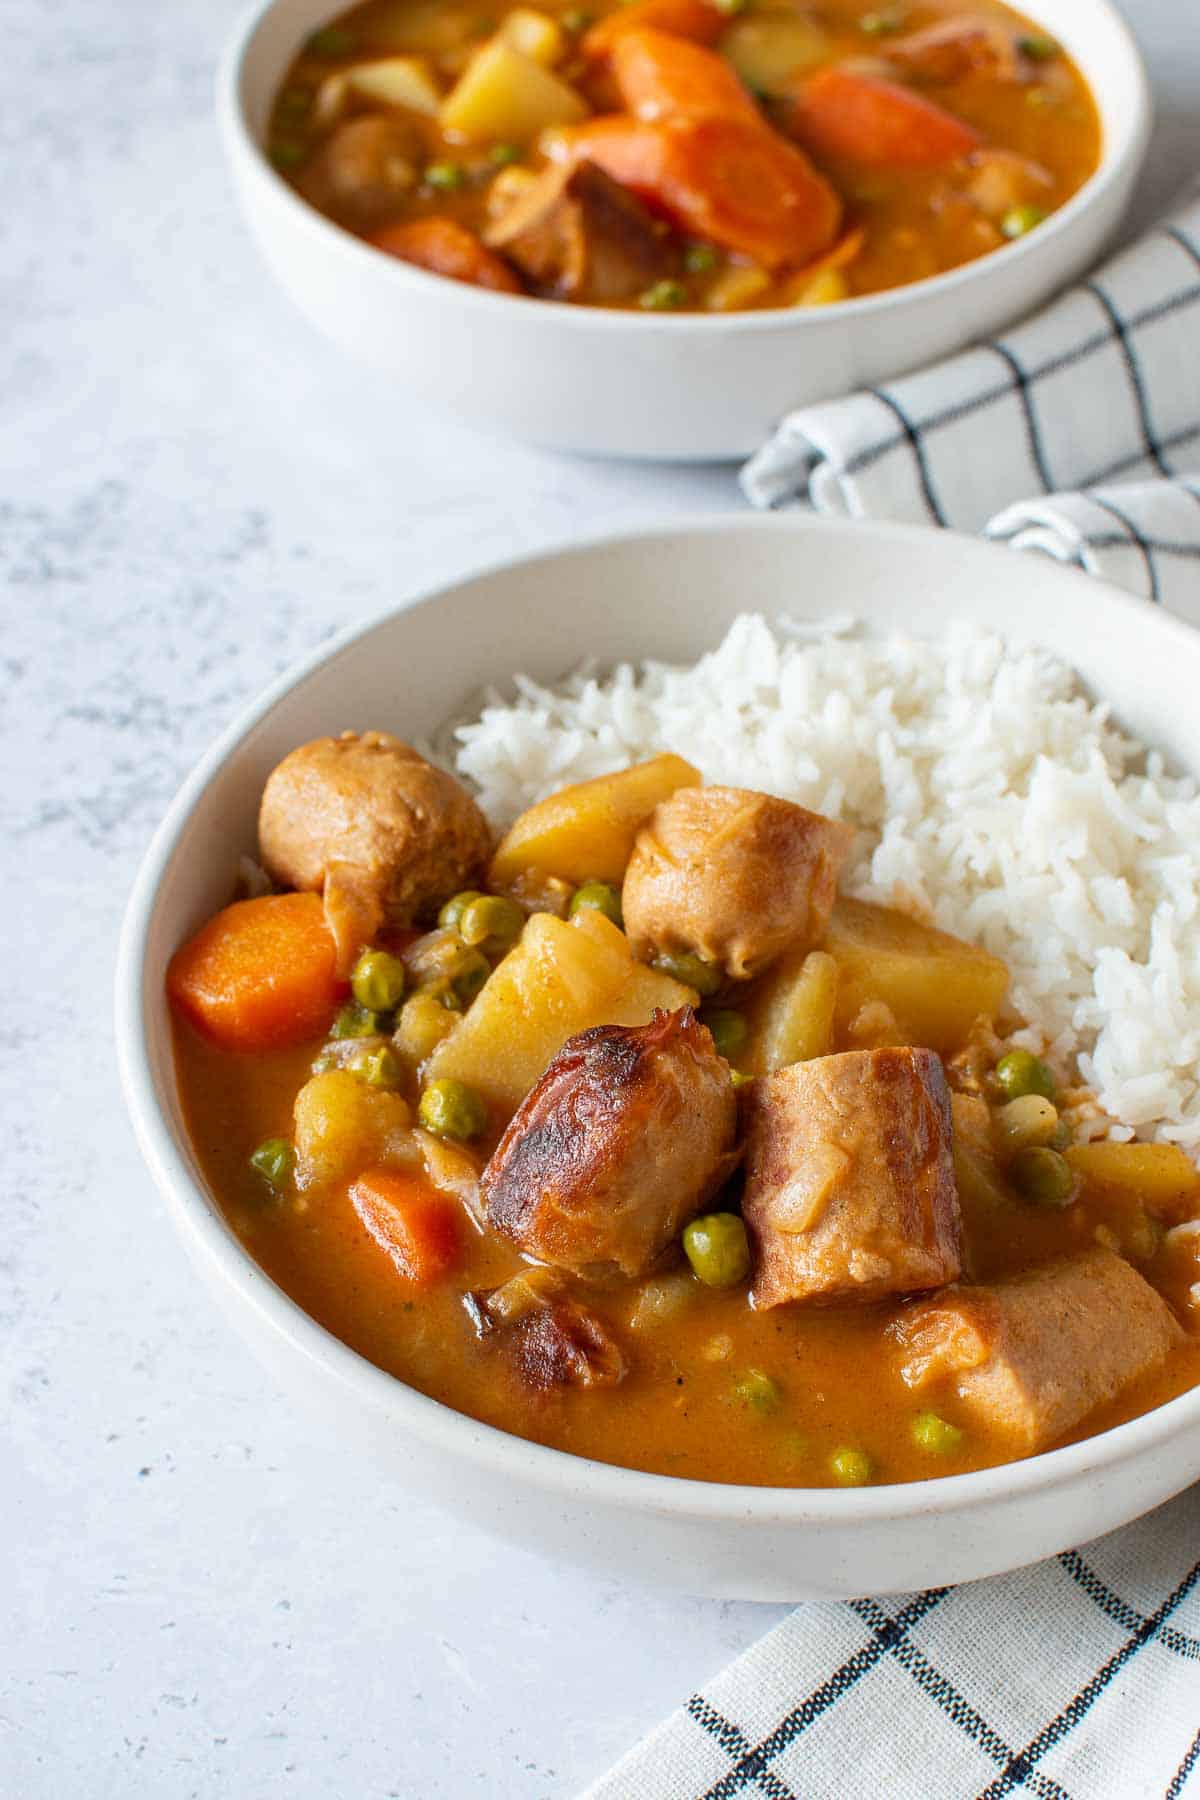 Curry with sausages, potatoes and carrots in a bowl with rice.